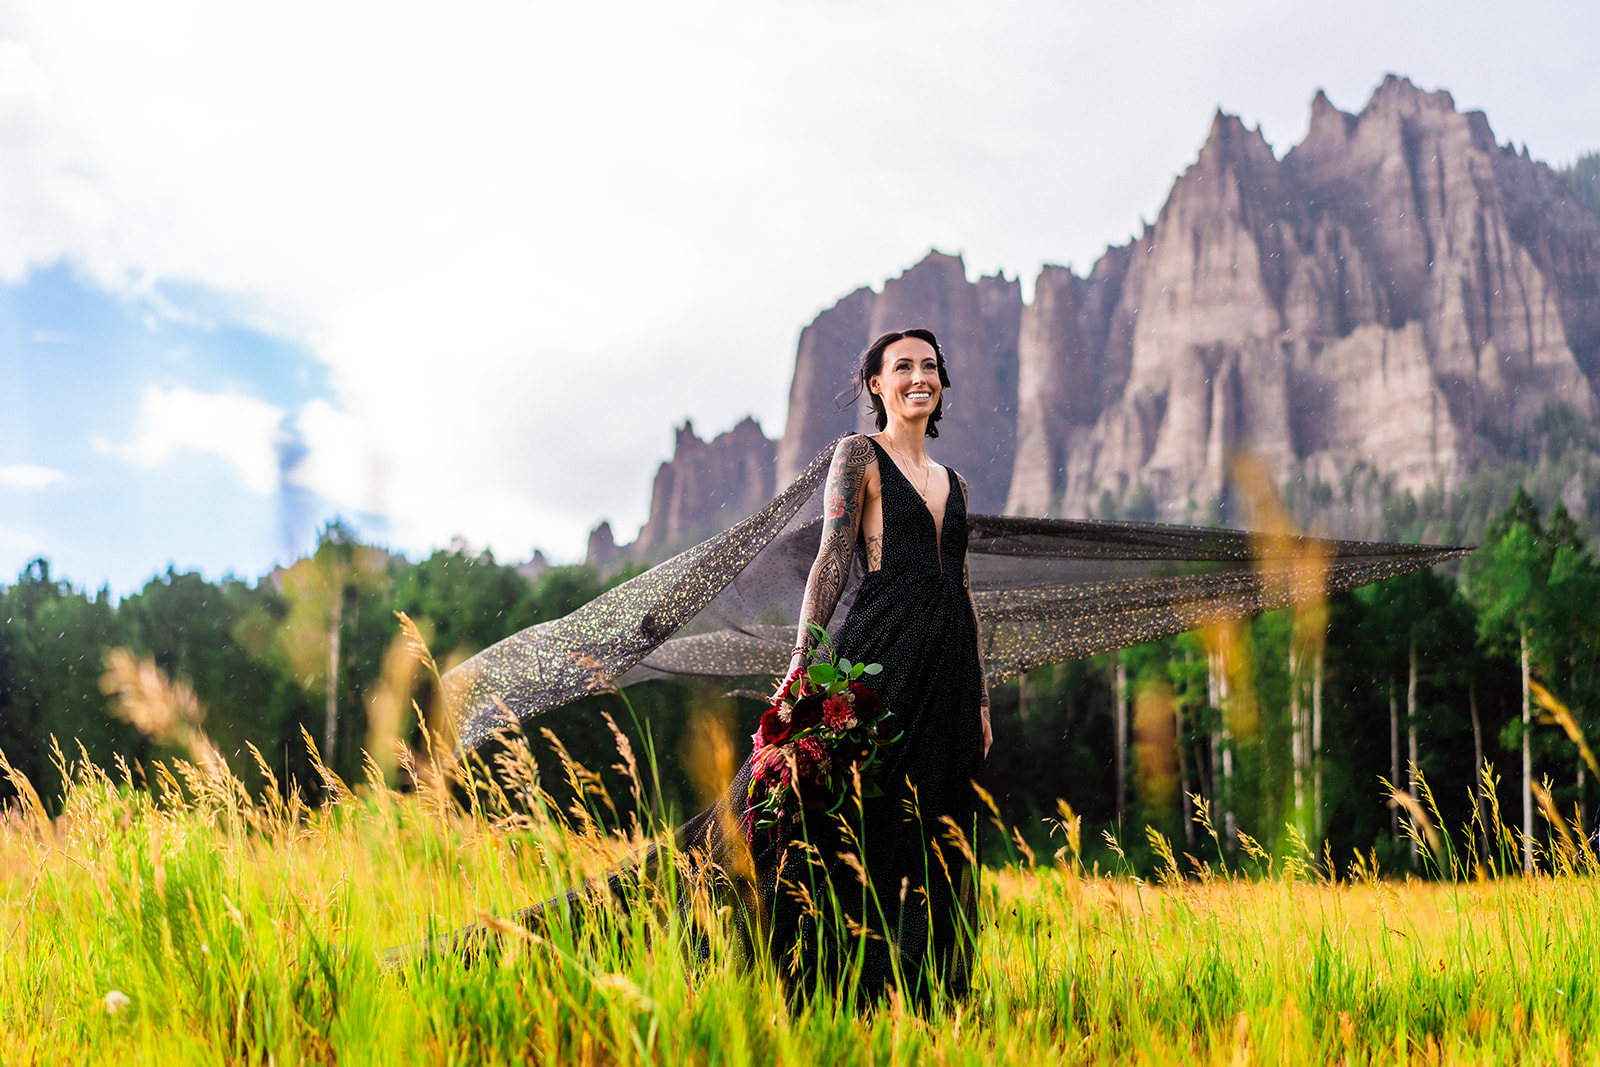 A bride in a black elopement dress standing in a field with mountains in the background.